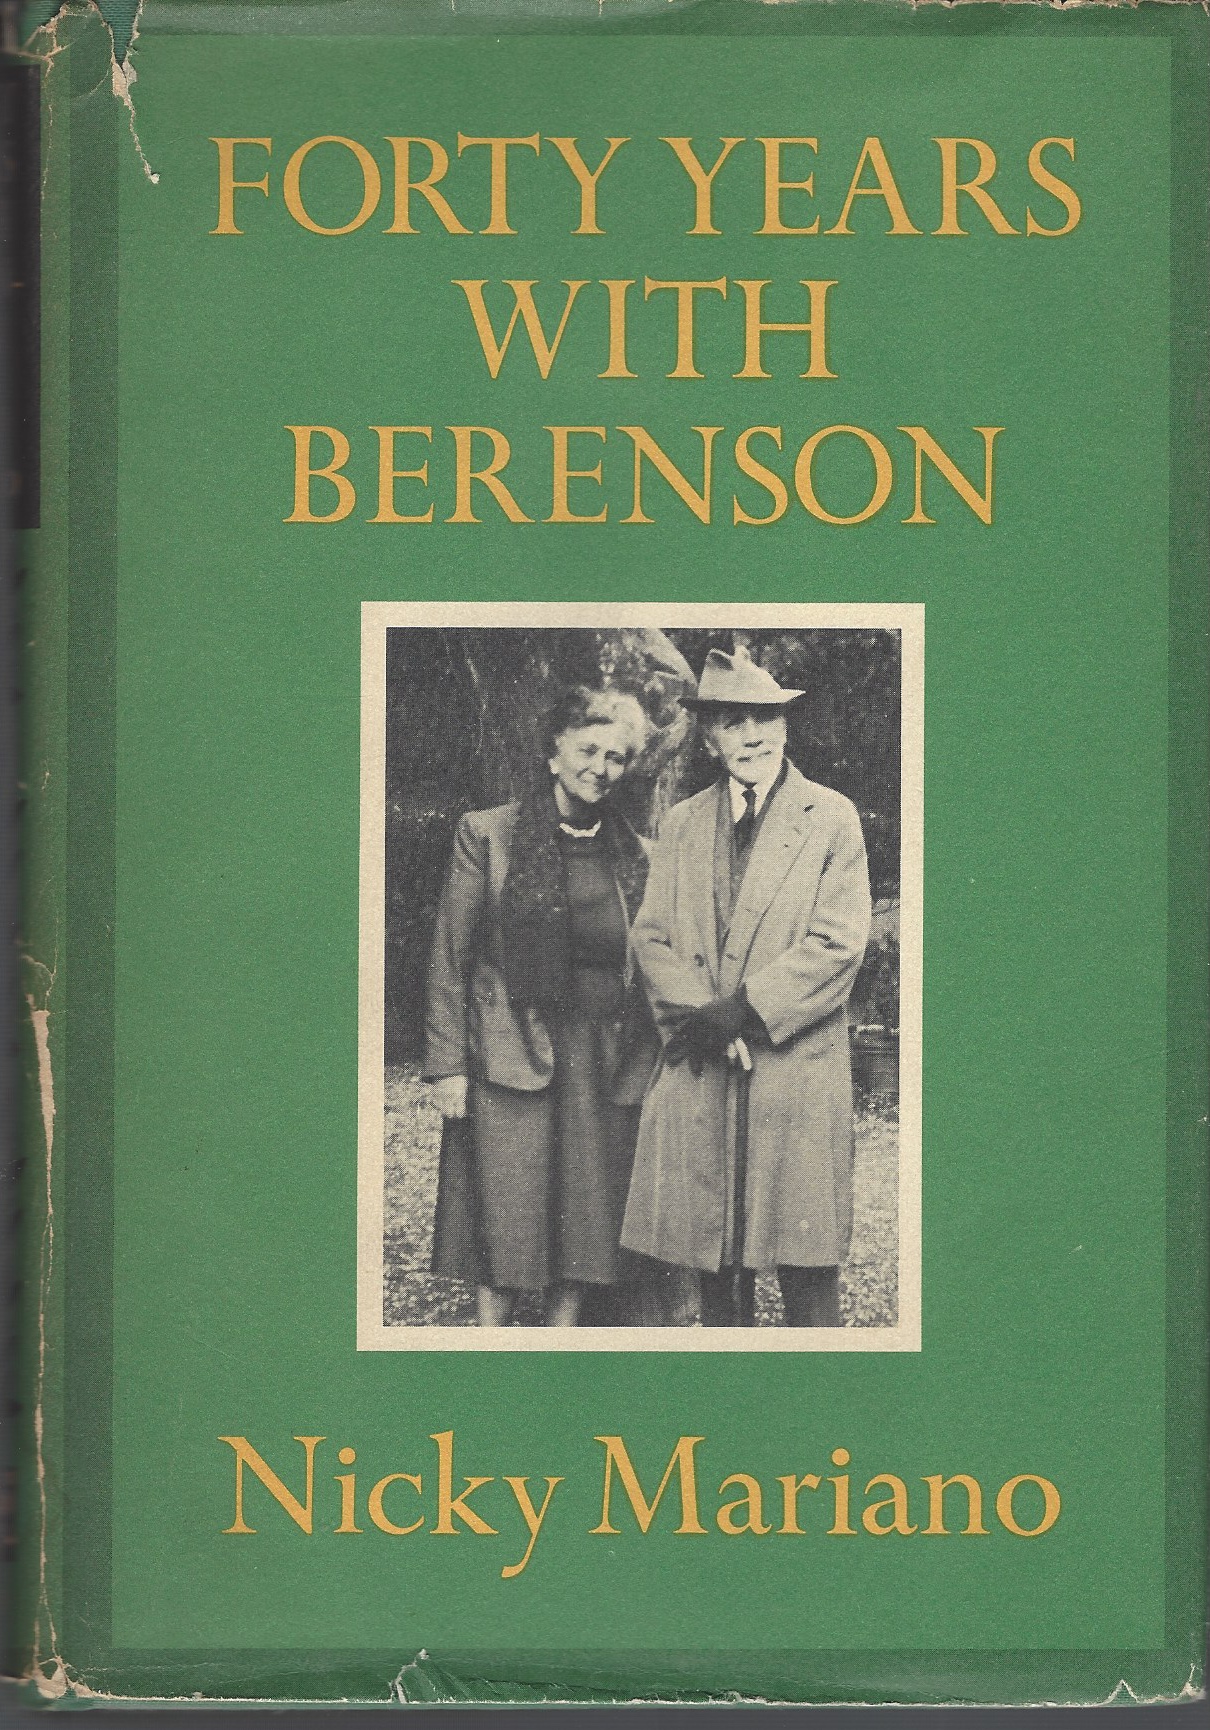 MARIANO NICKY - Forty Years with Berenson